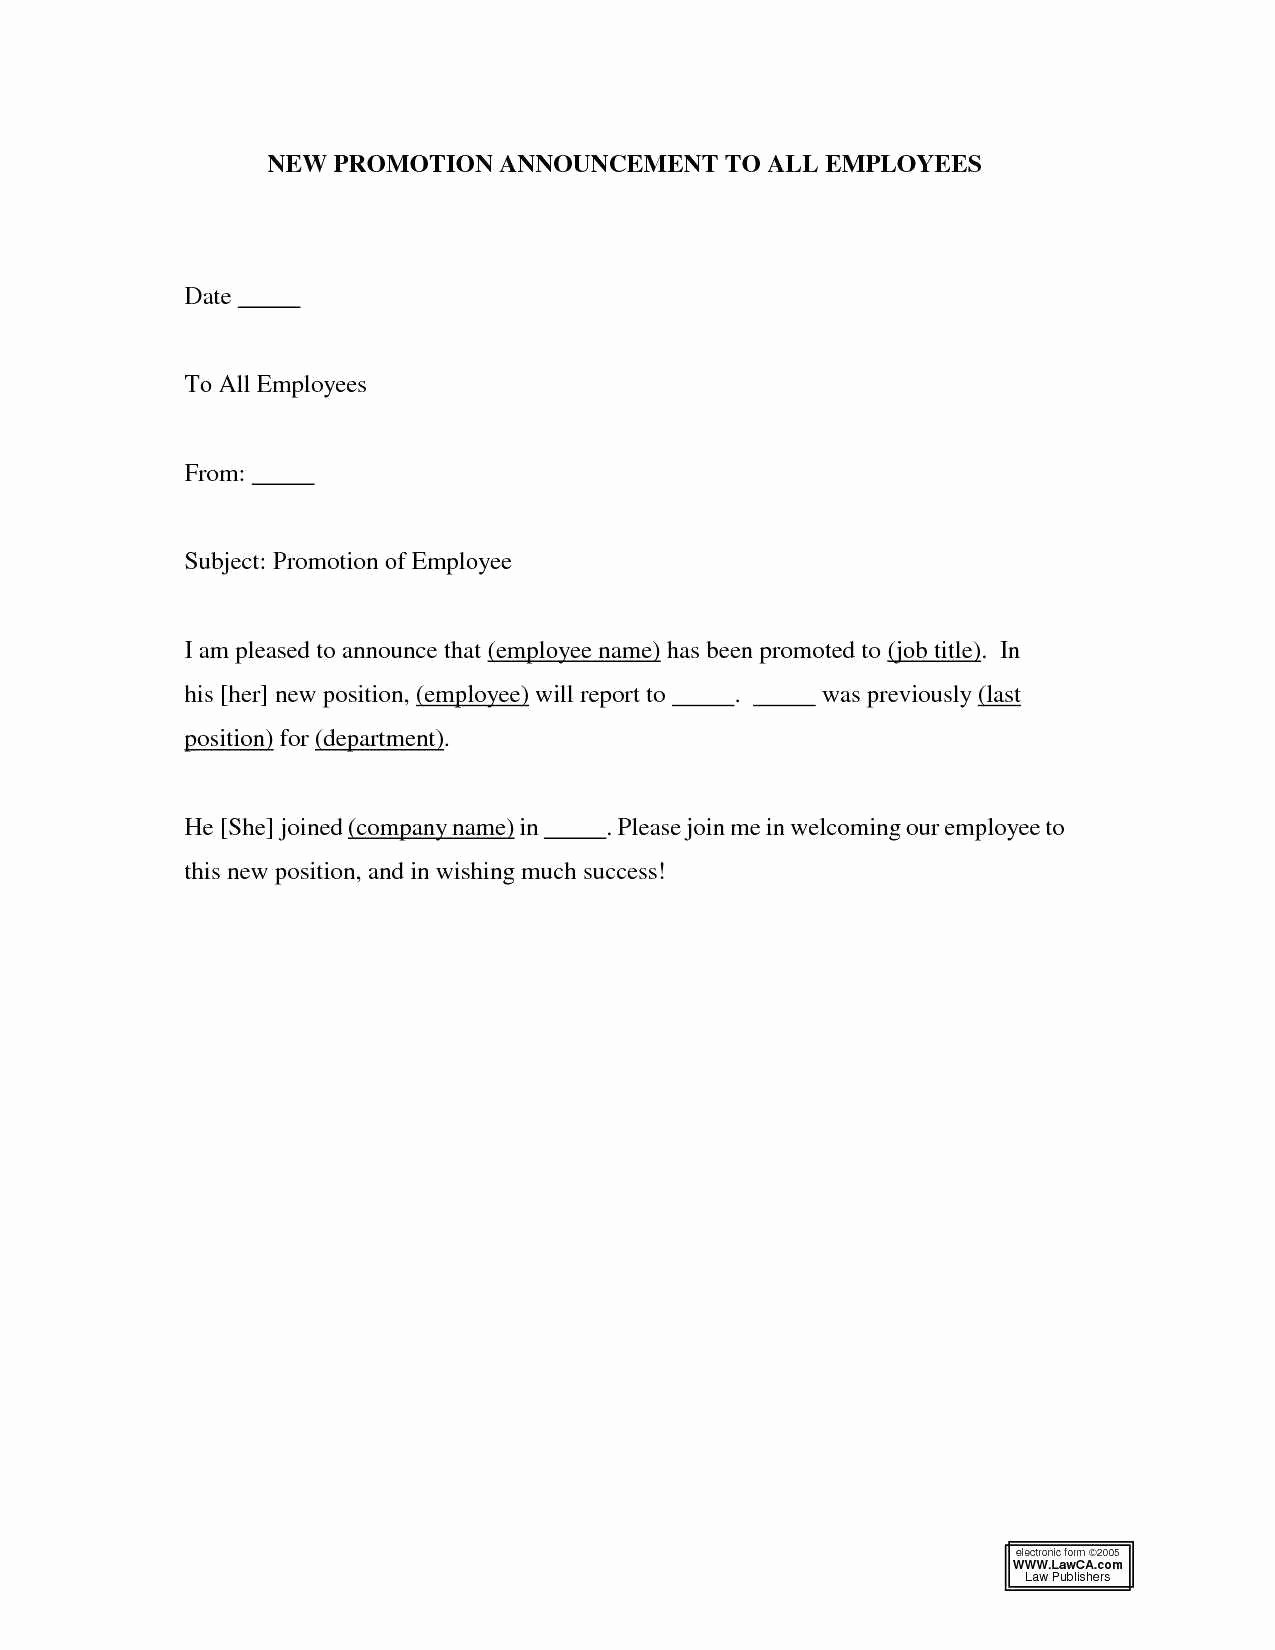 Promotion Announcement Examples Best Of Inspirational Brand Ambassador Cover Letter Sample